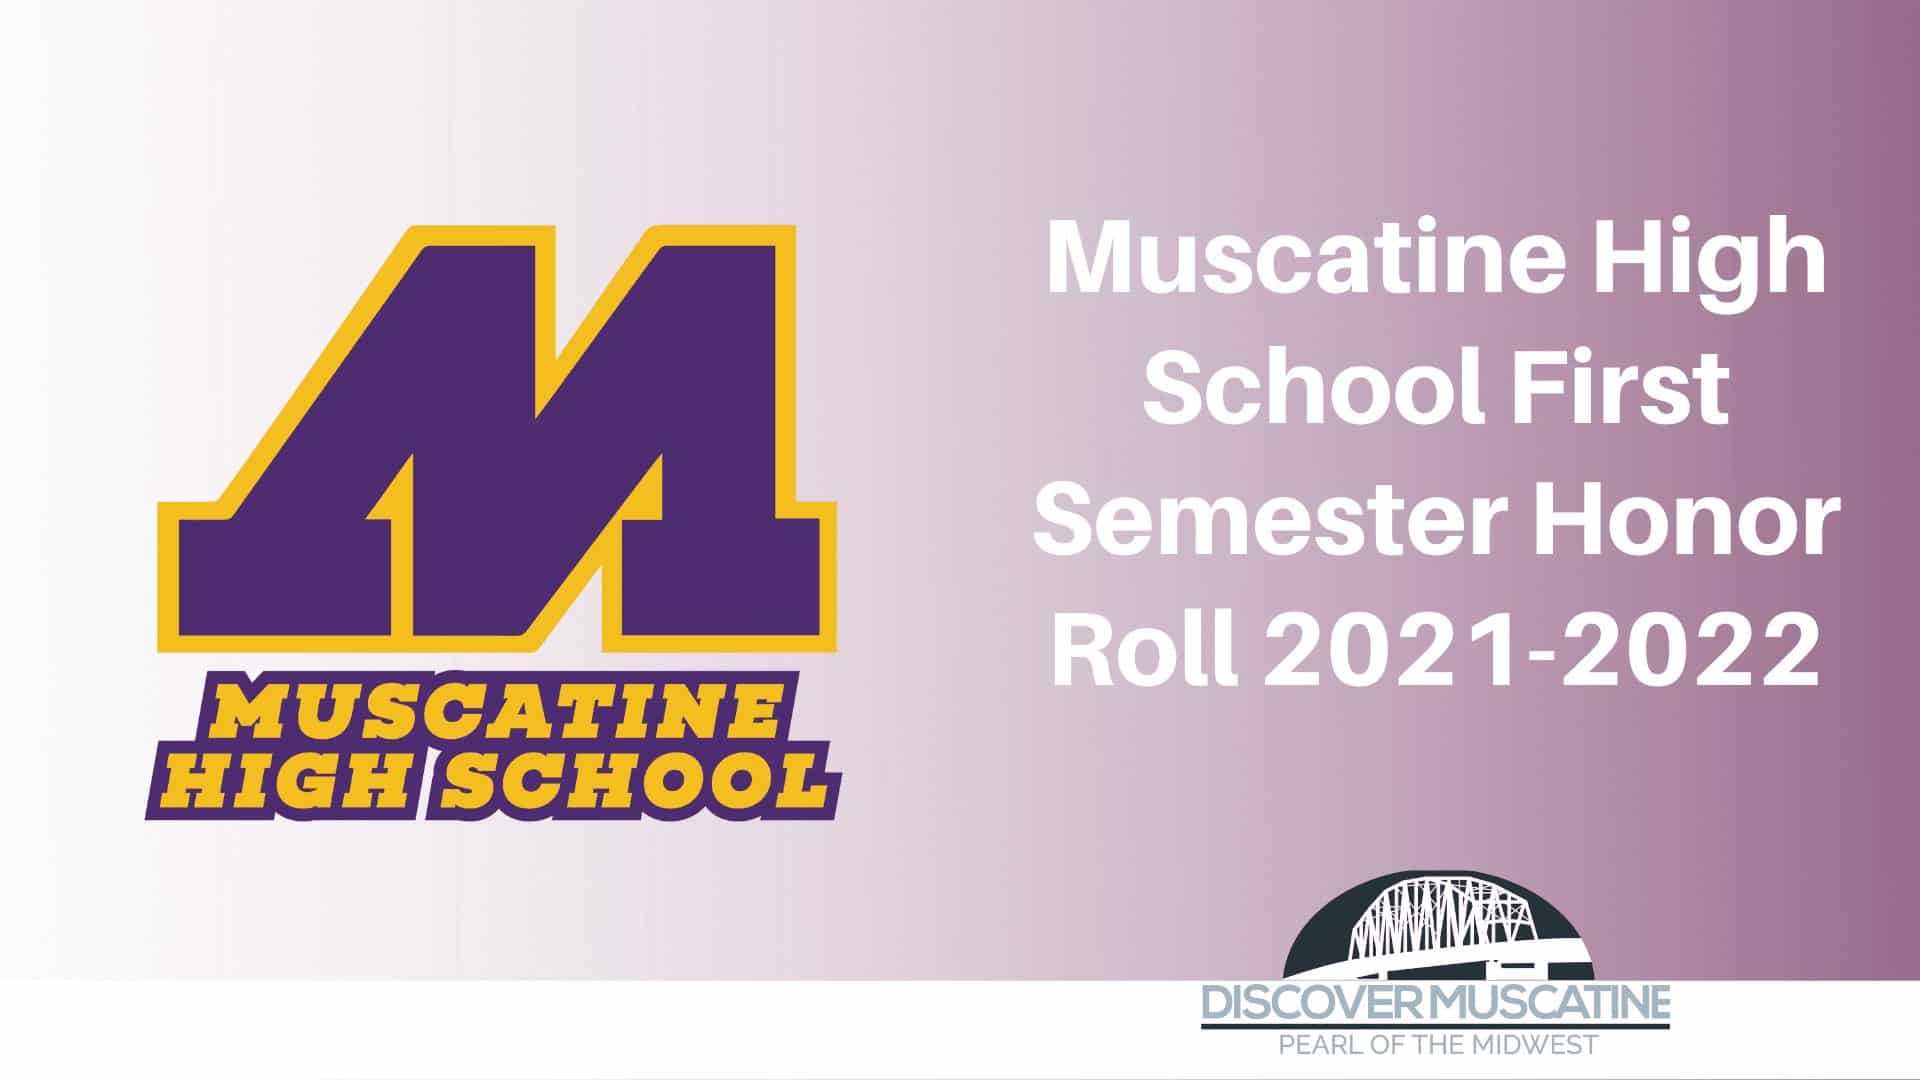 Muscatine High School First Semester Honor Roll 2021-2022